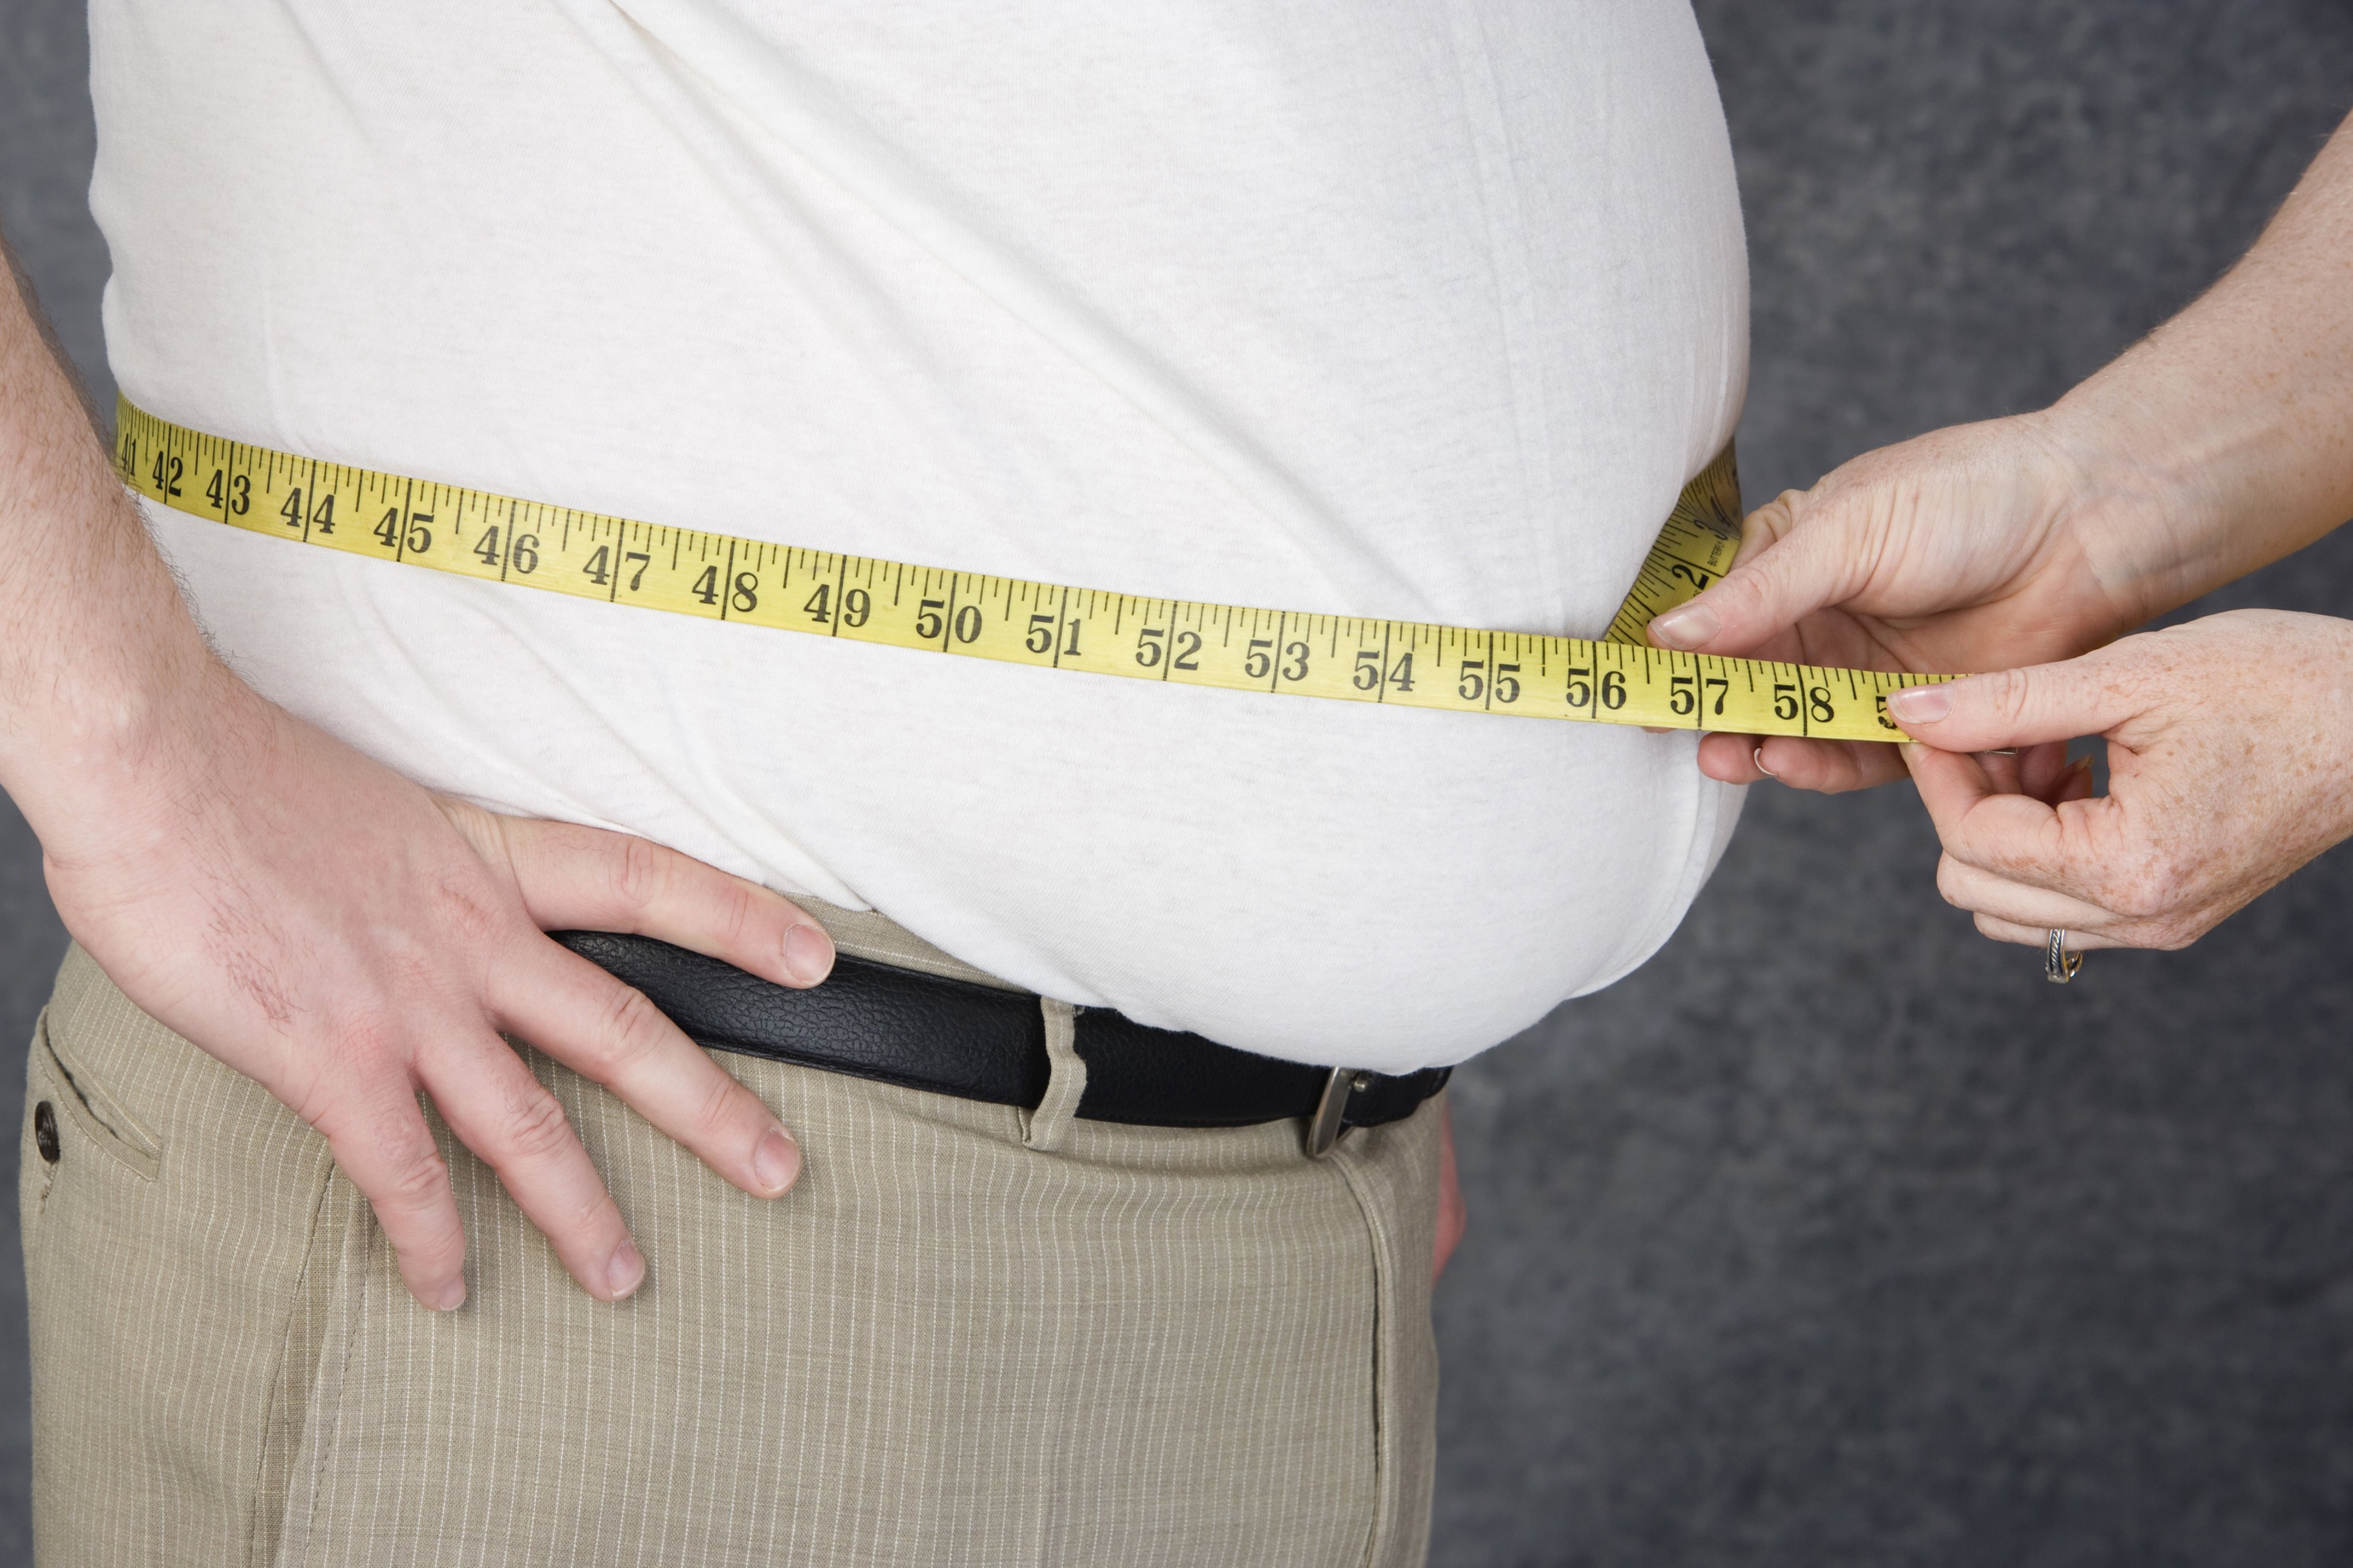 Obesity is accompanied by a greater risk of death from heart disease, diabetes and certain cancers. File photo: TNS